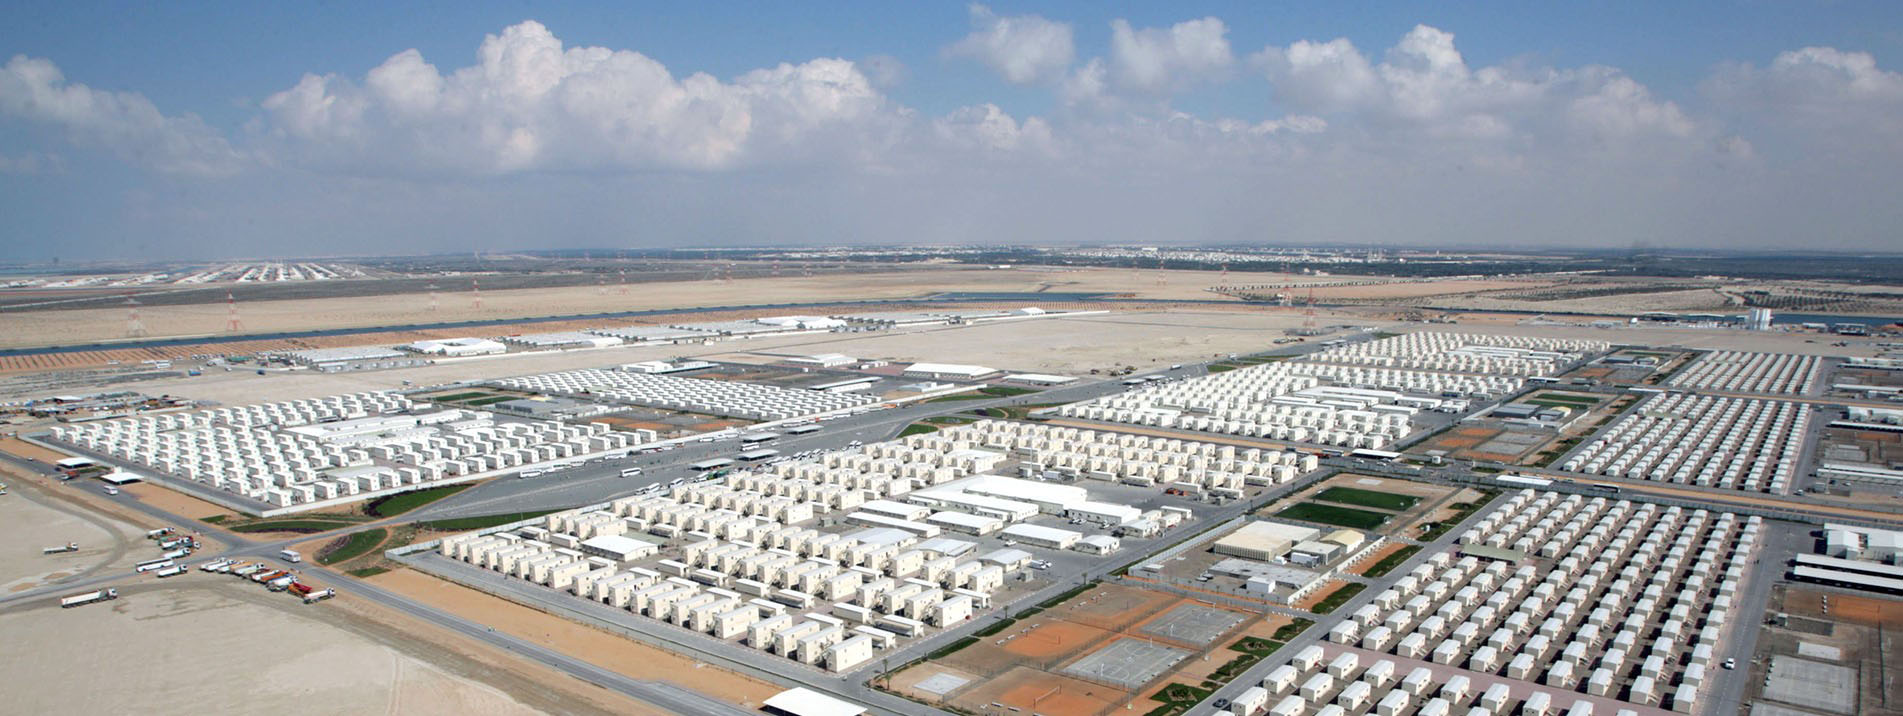 Aerial perspective of a workforce camp in the United Arab Emirates.